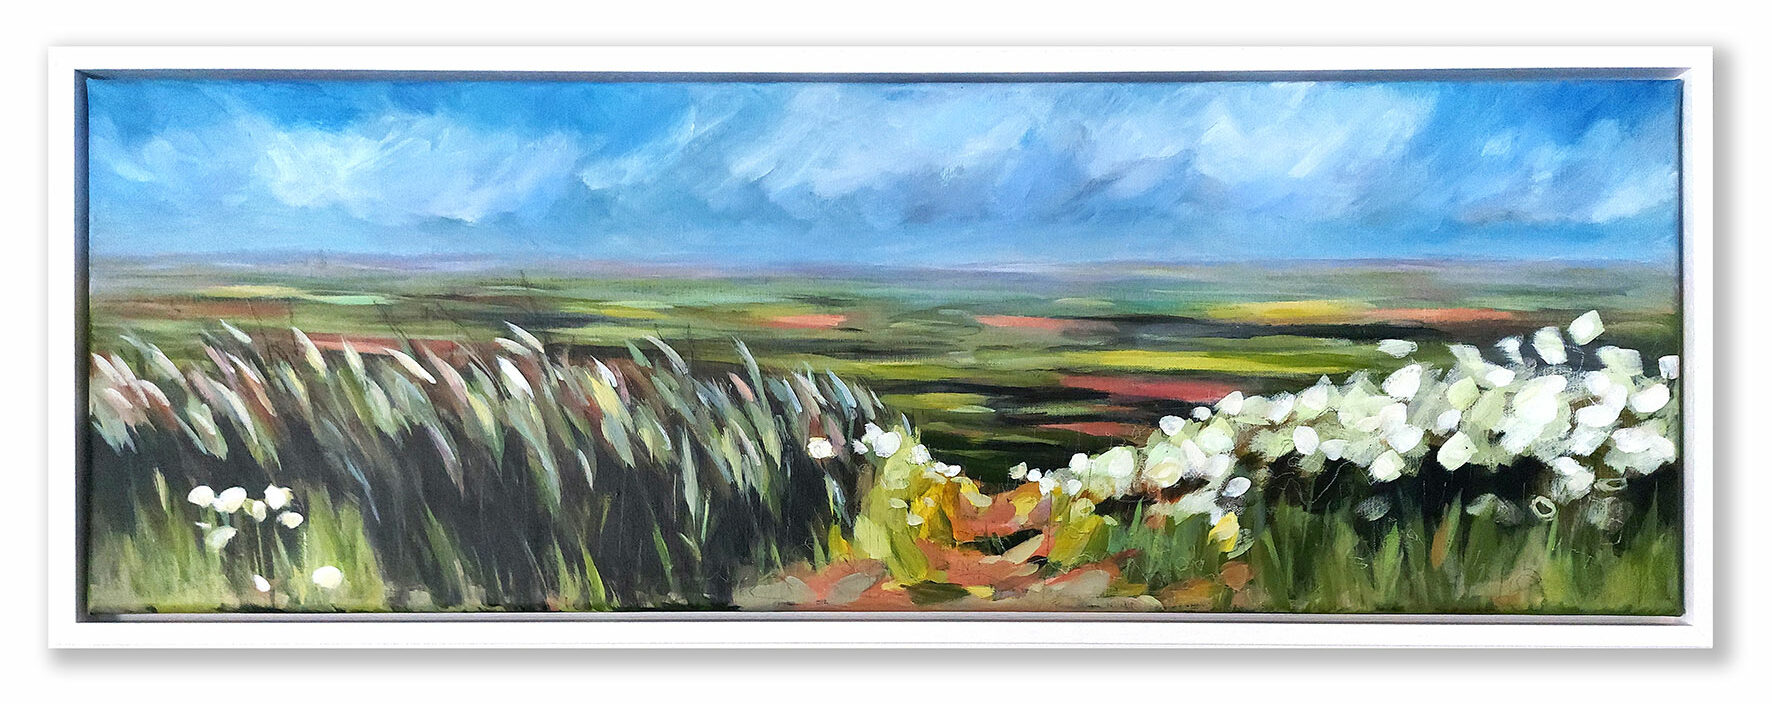 June: Garrowby Hill. Plein air painting in acrylic on canvas